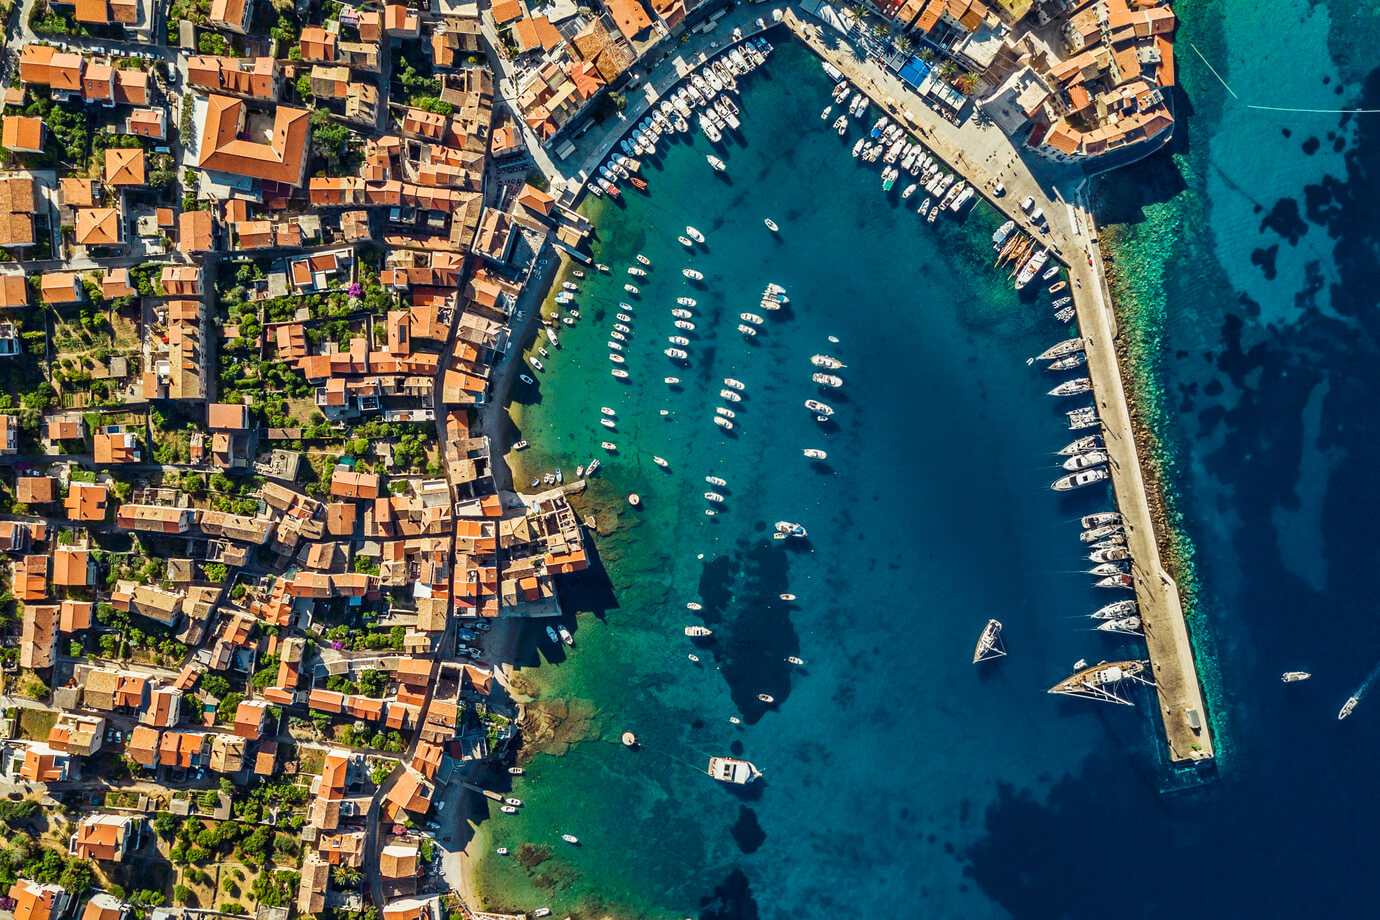 Drone View on a Beach Bay. Aerial View of a Coastal City with Red Roofs near Yacht Harbor. Luxury Summer Vacation in Dubrovnik. Croatia.